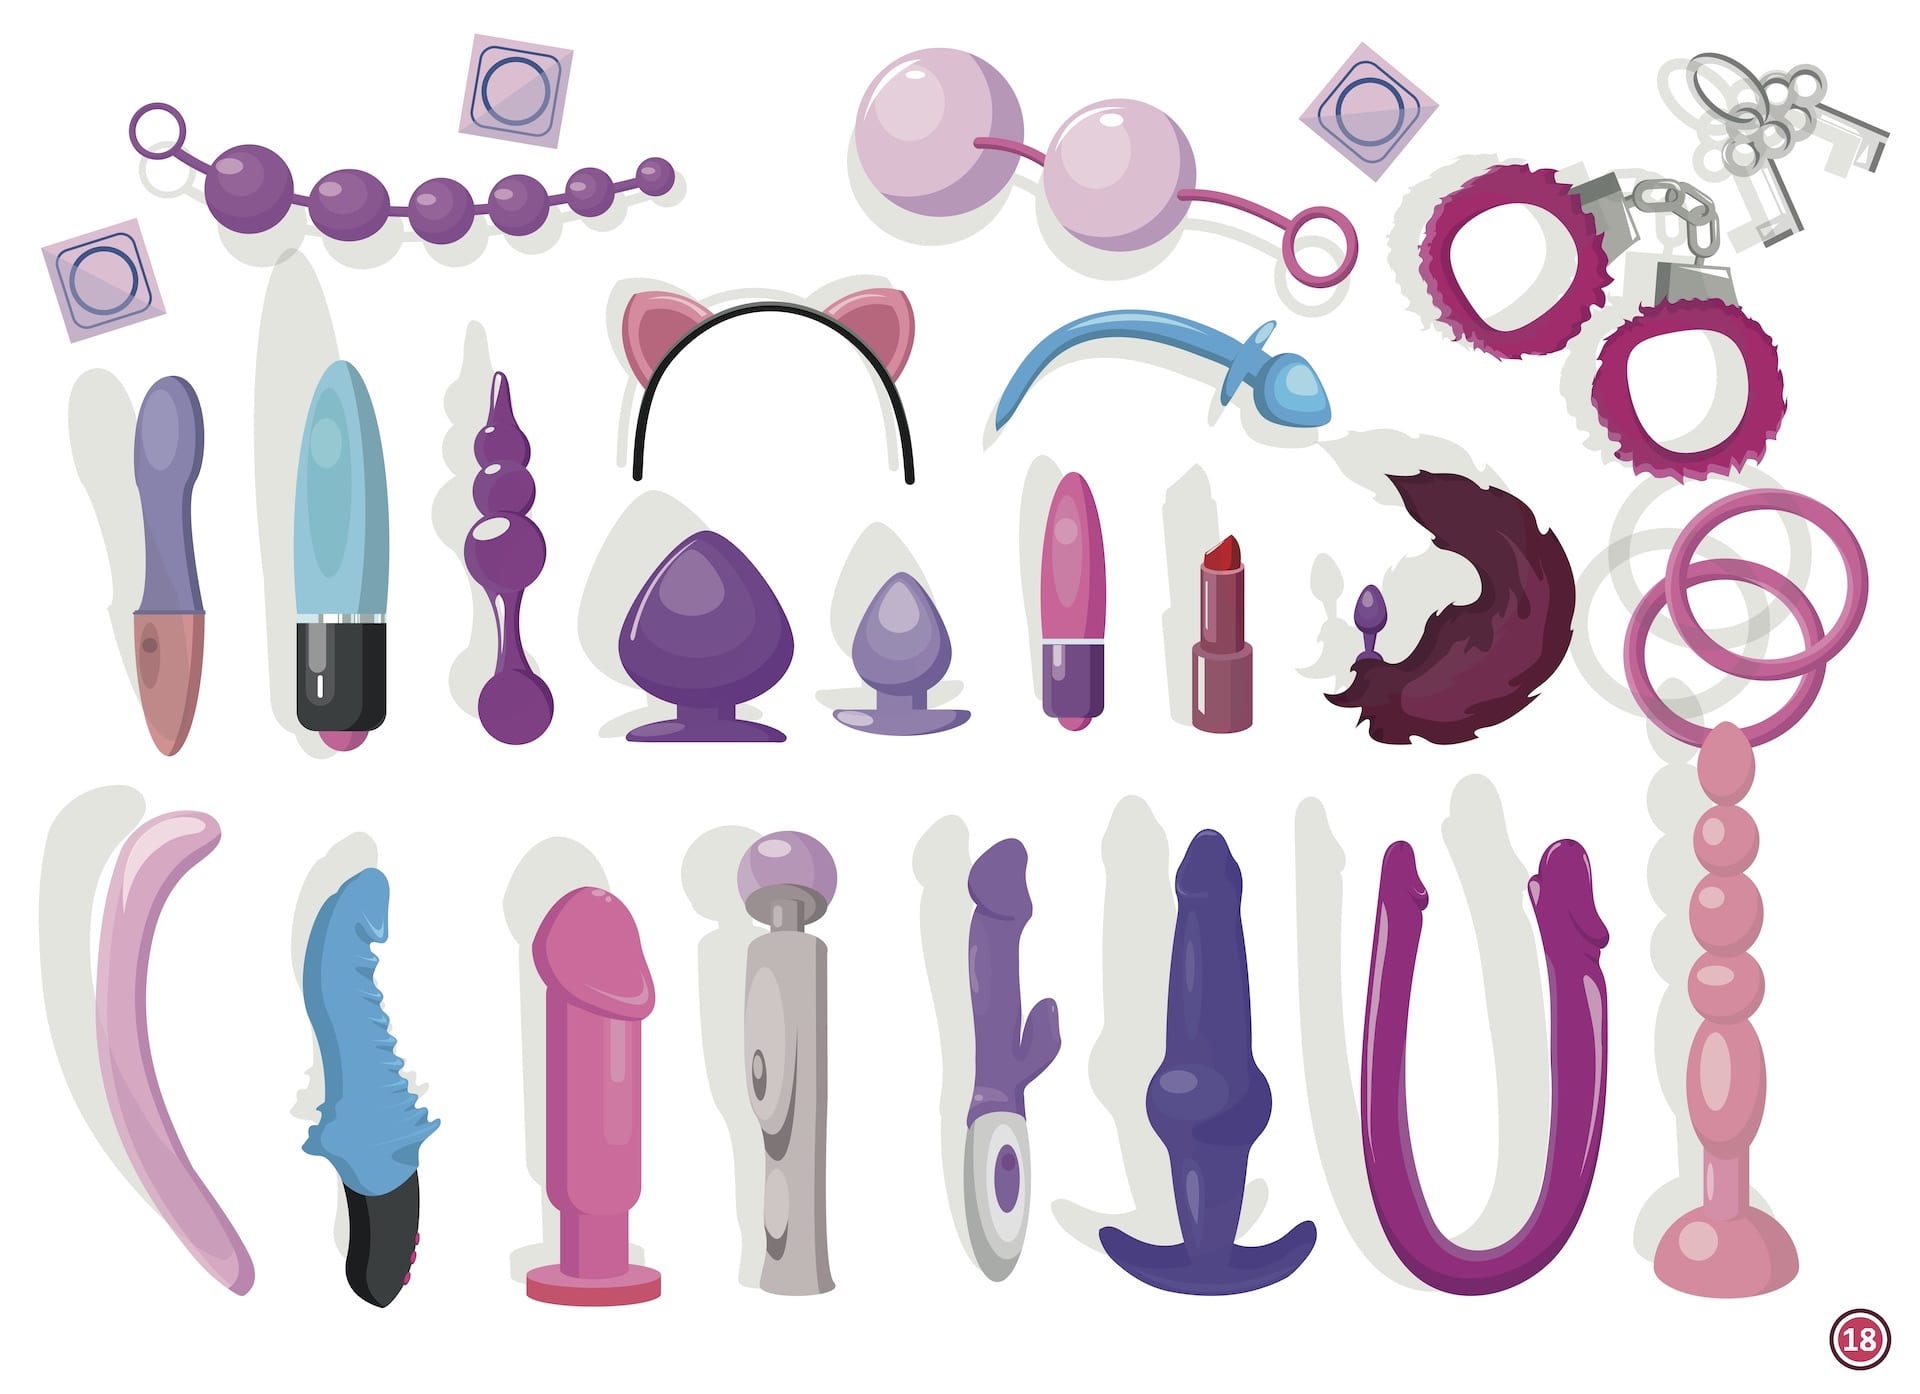 Why I Review Sex Toys